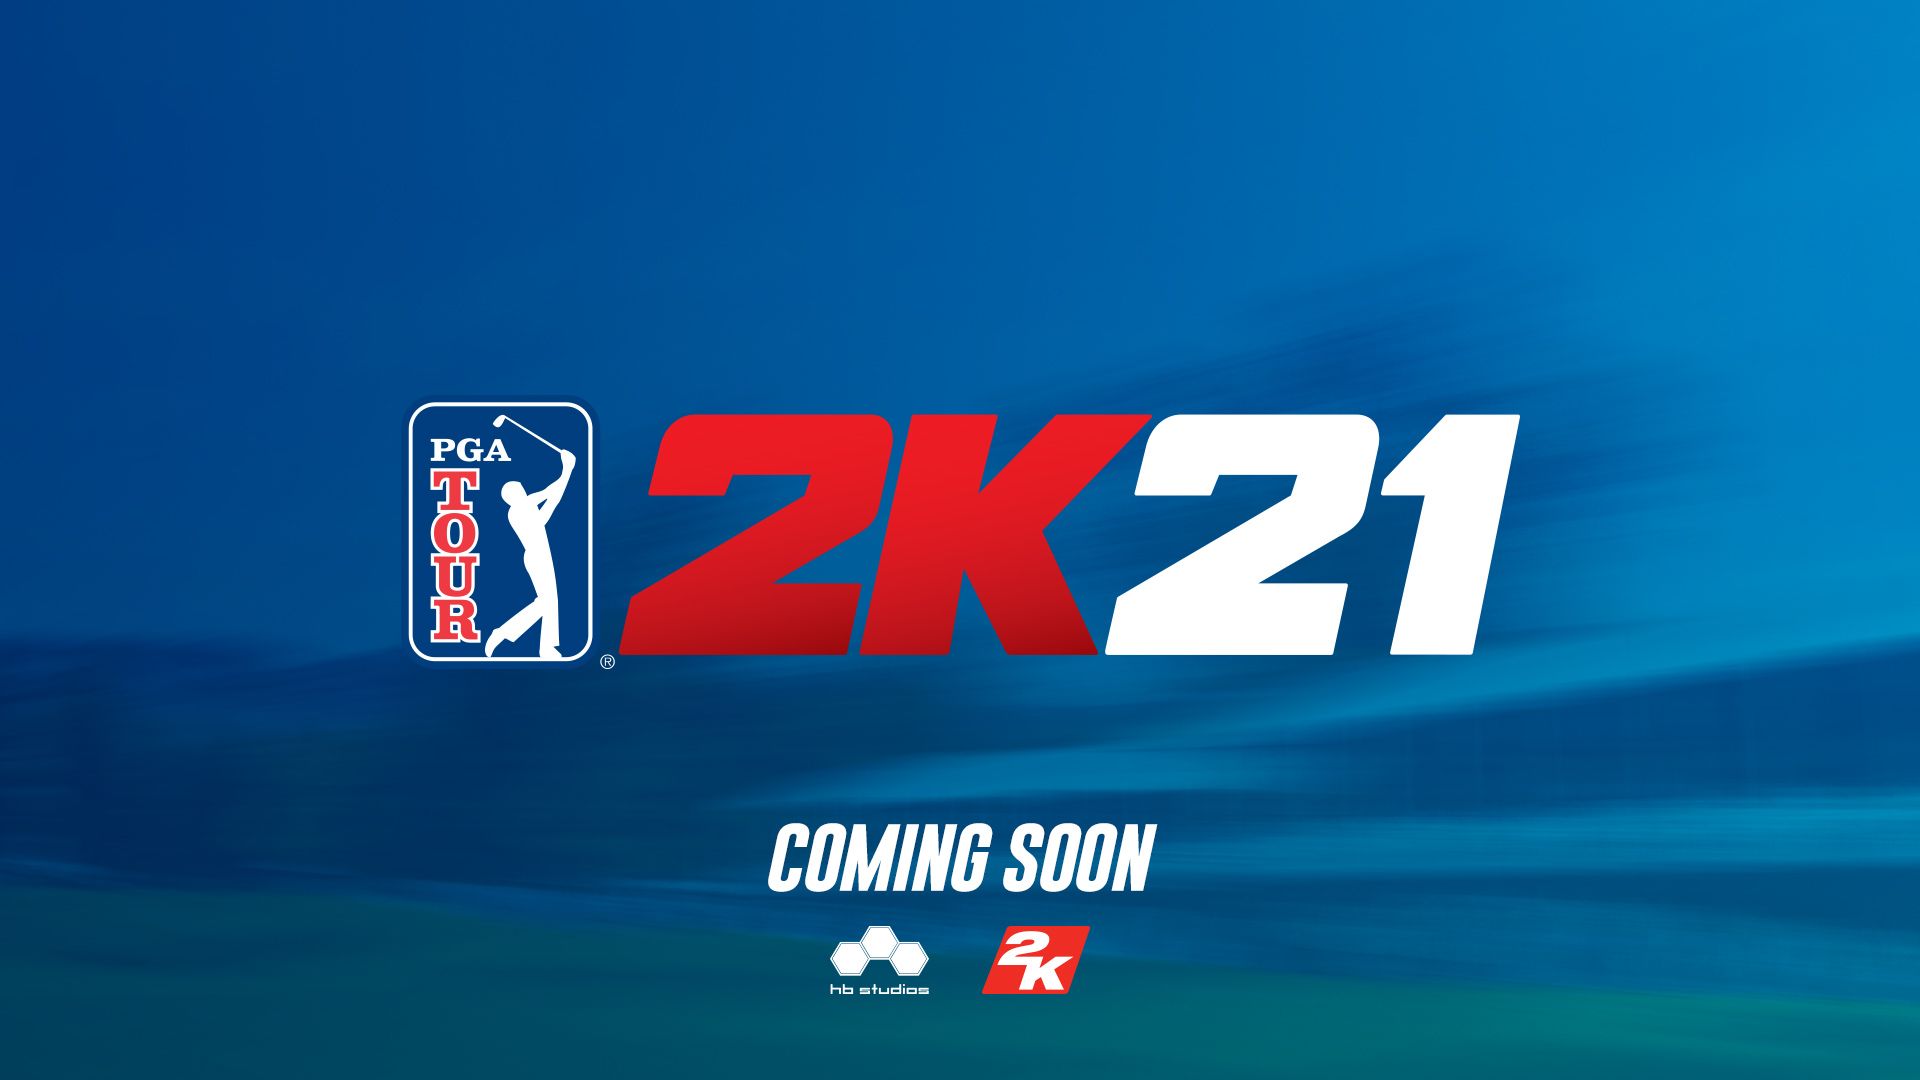 PGA TOUR® 2K21 Is Coming! Stay Tuned for More News May 14